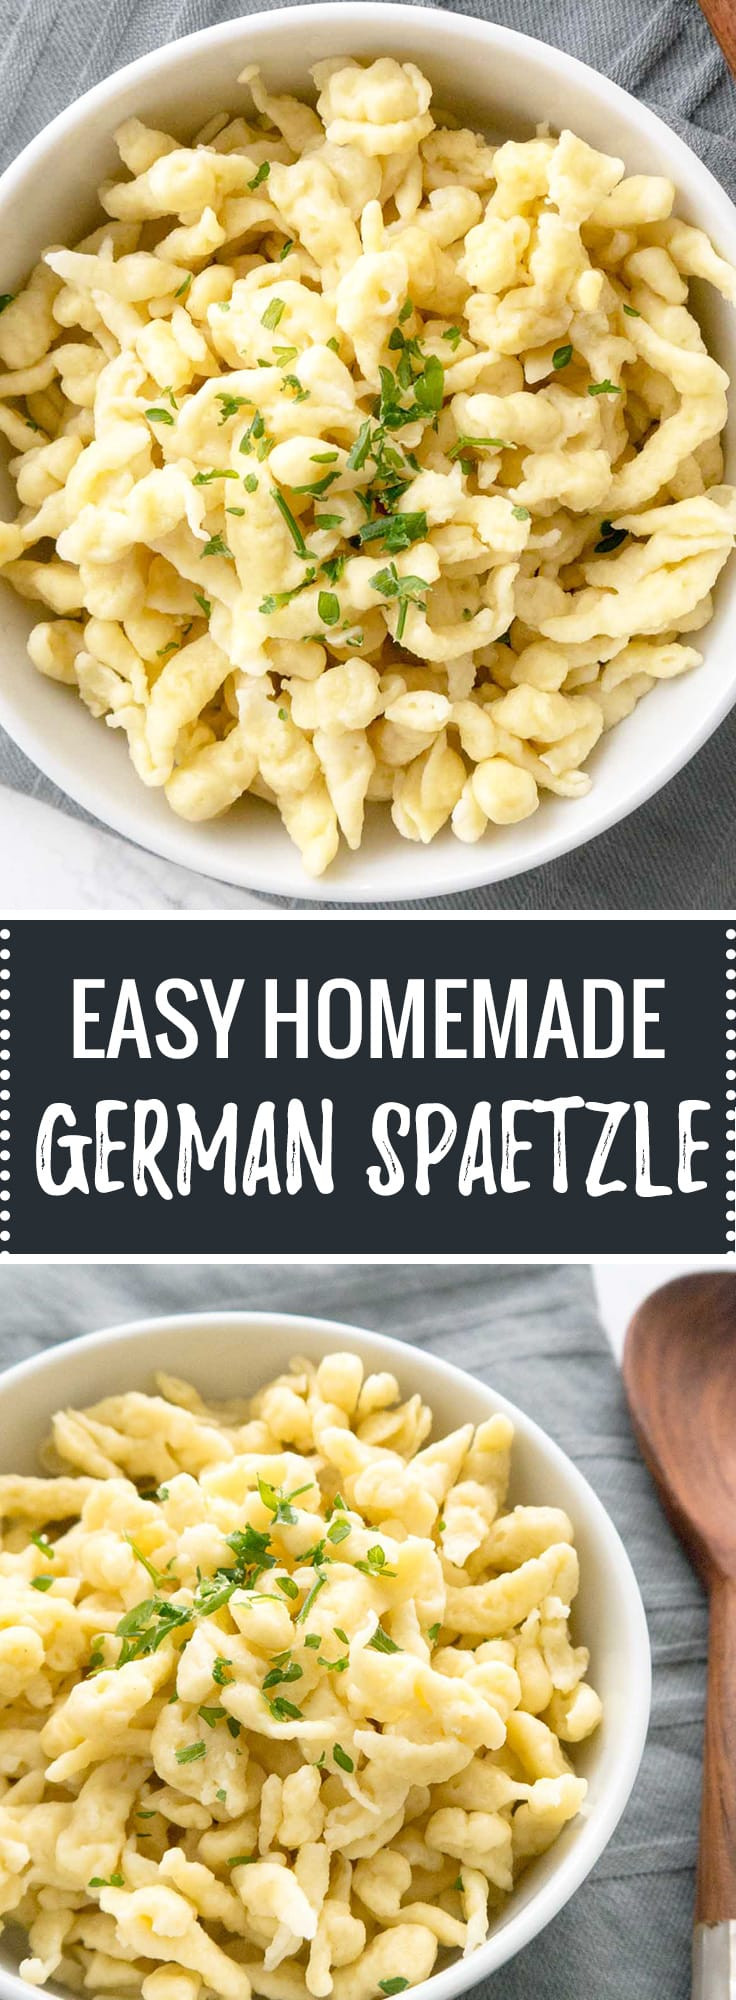 Recipes With Spaetzle Noodles
 Homemade German Spaetzle Recipe German Egg Noodles